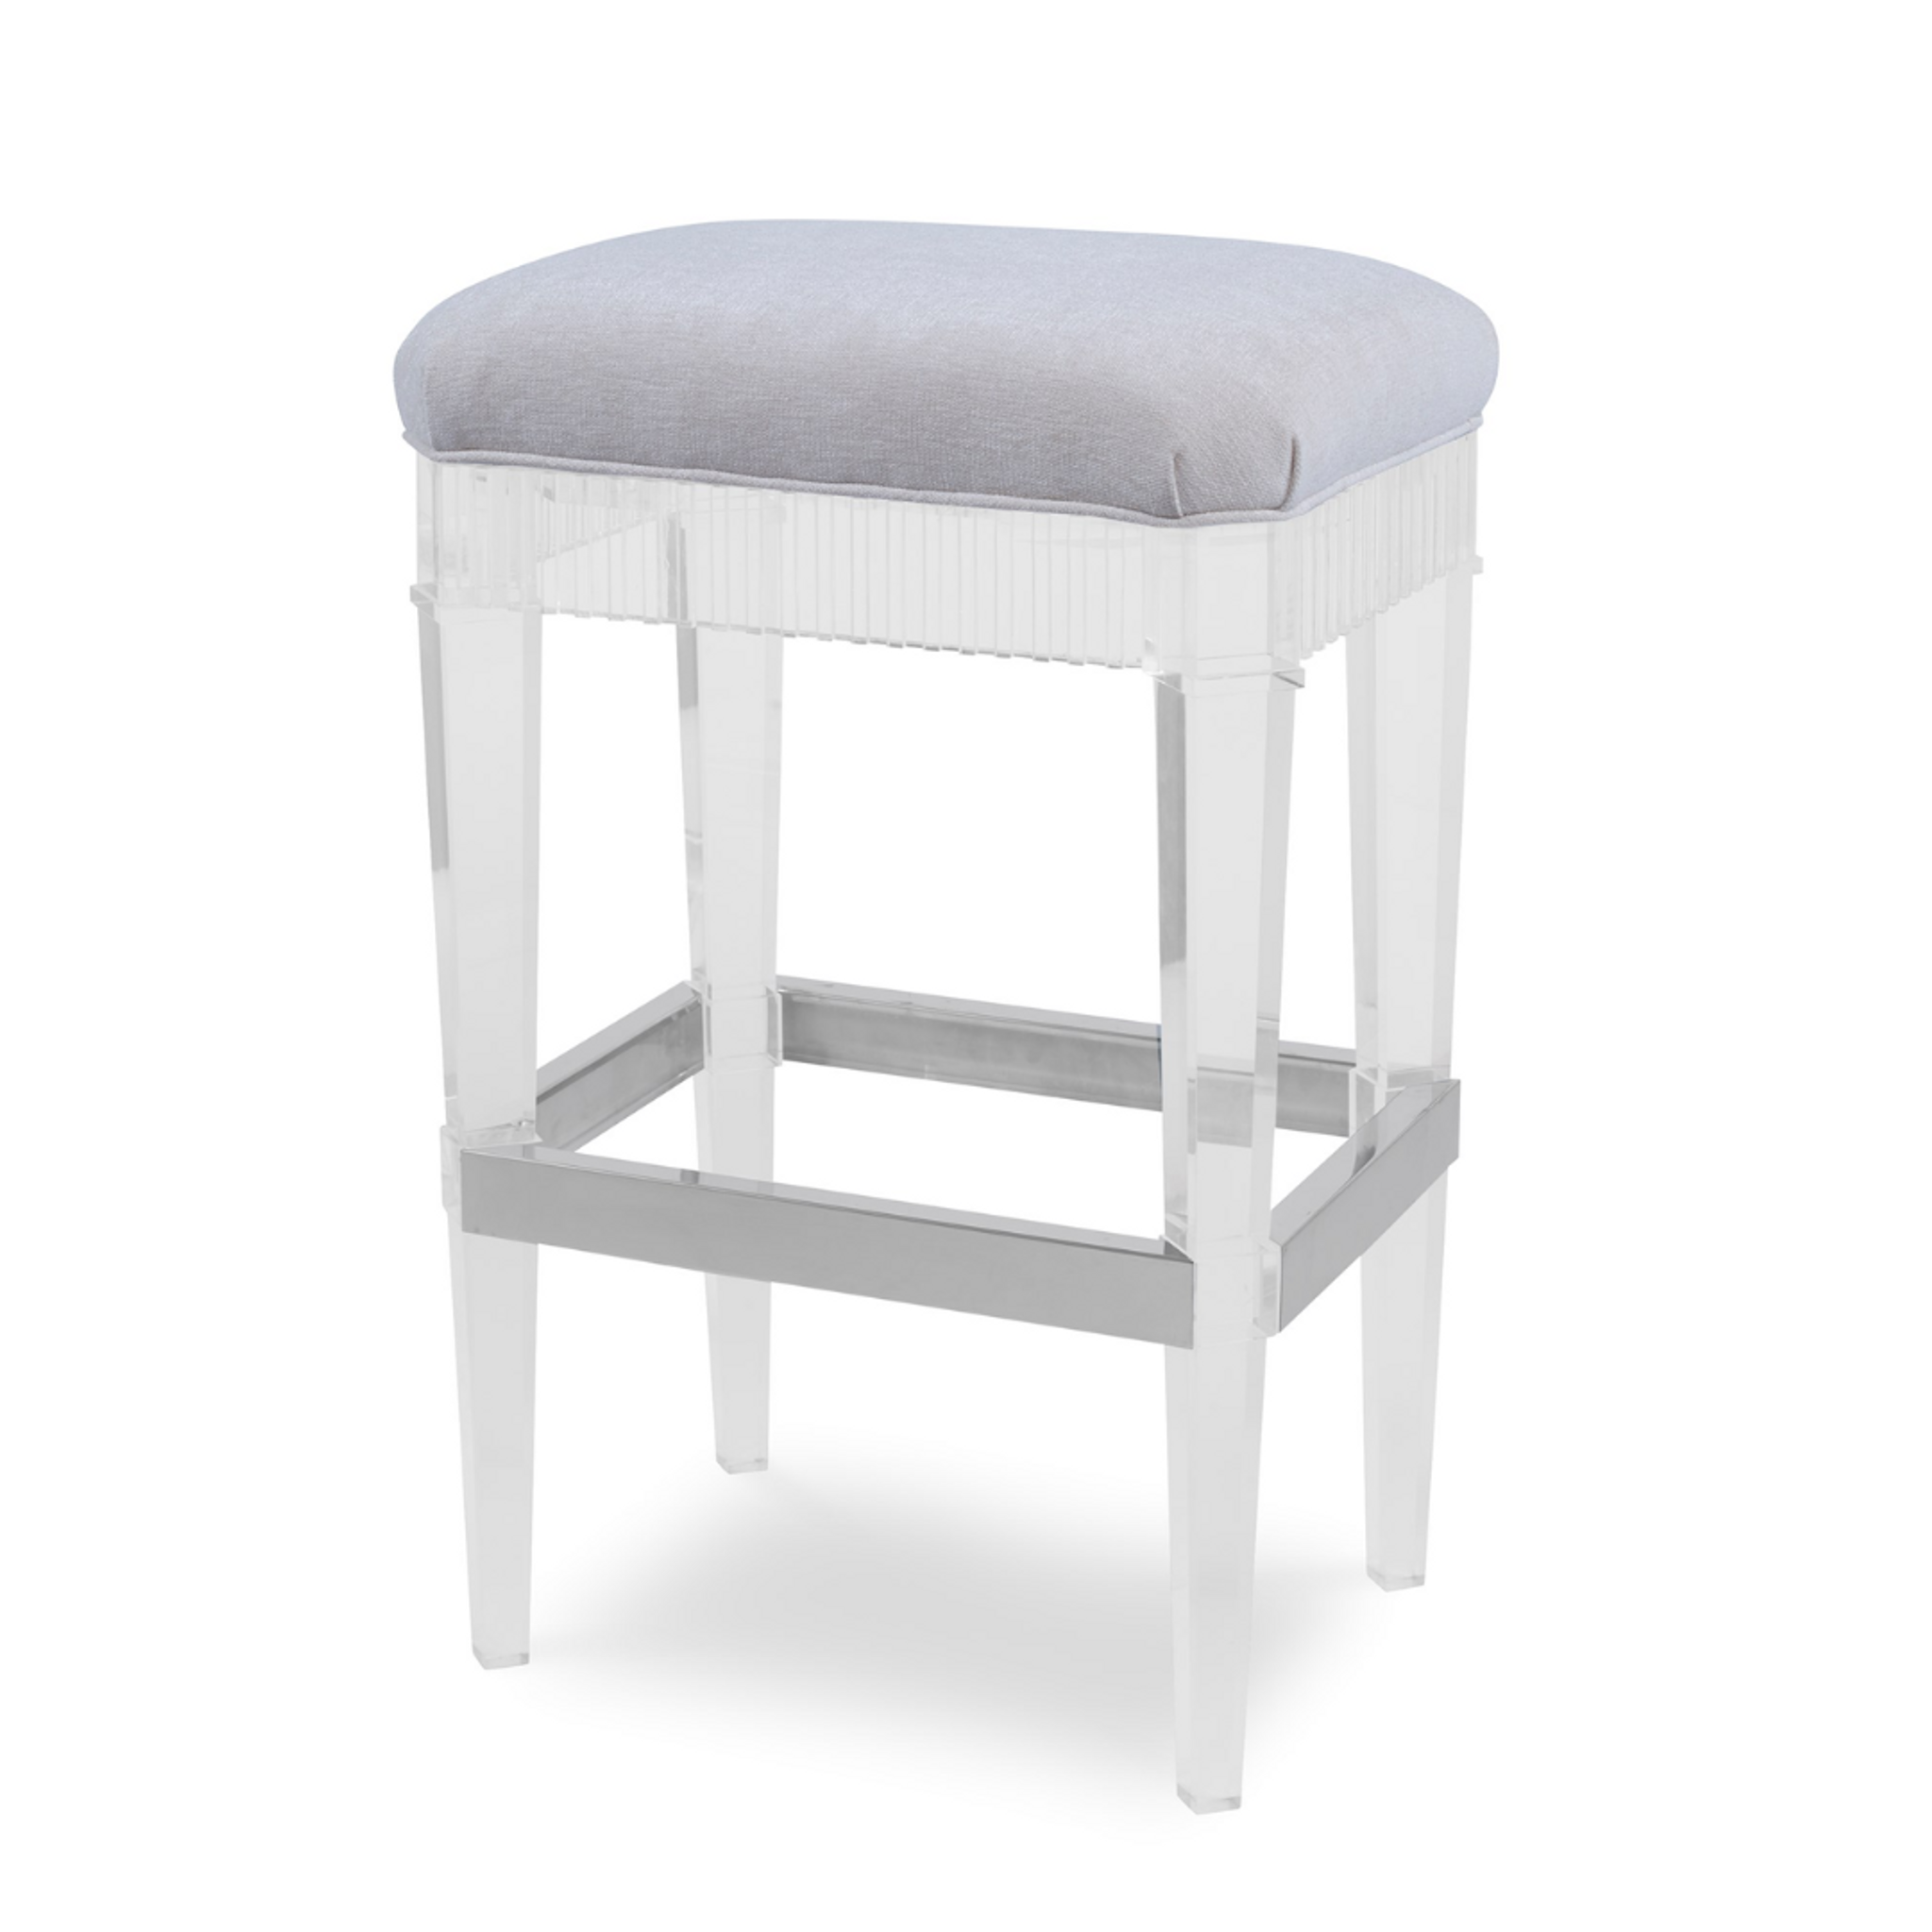 Fluted Lucite Barstool backless glam clear acrylic